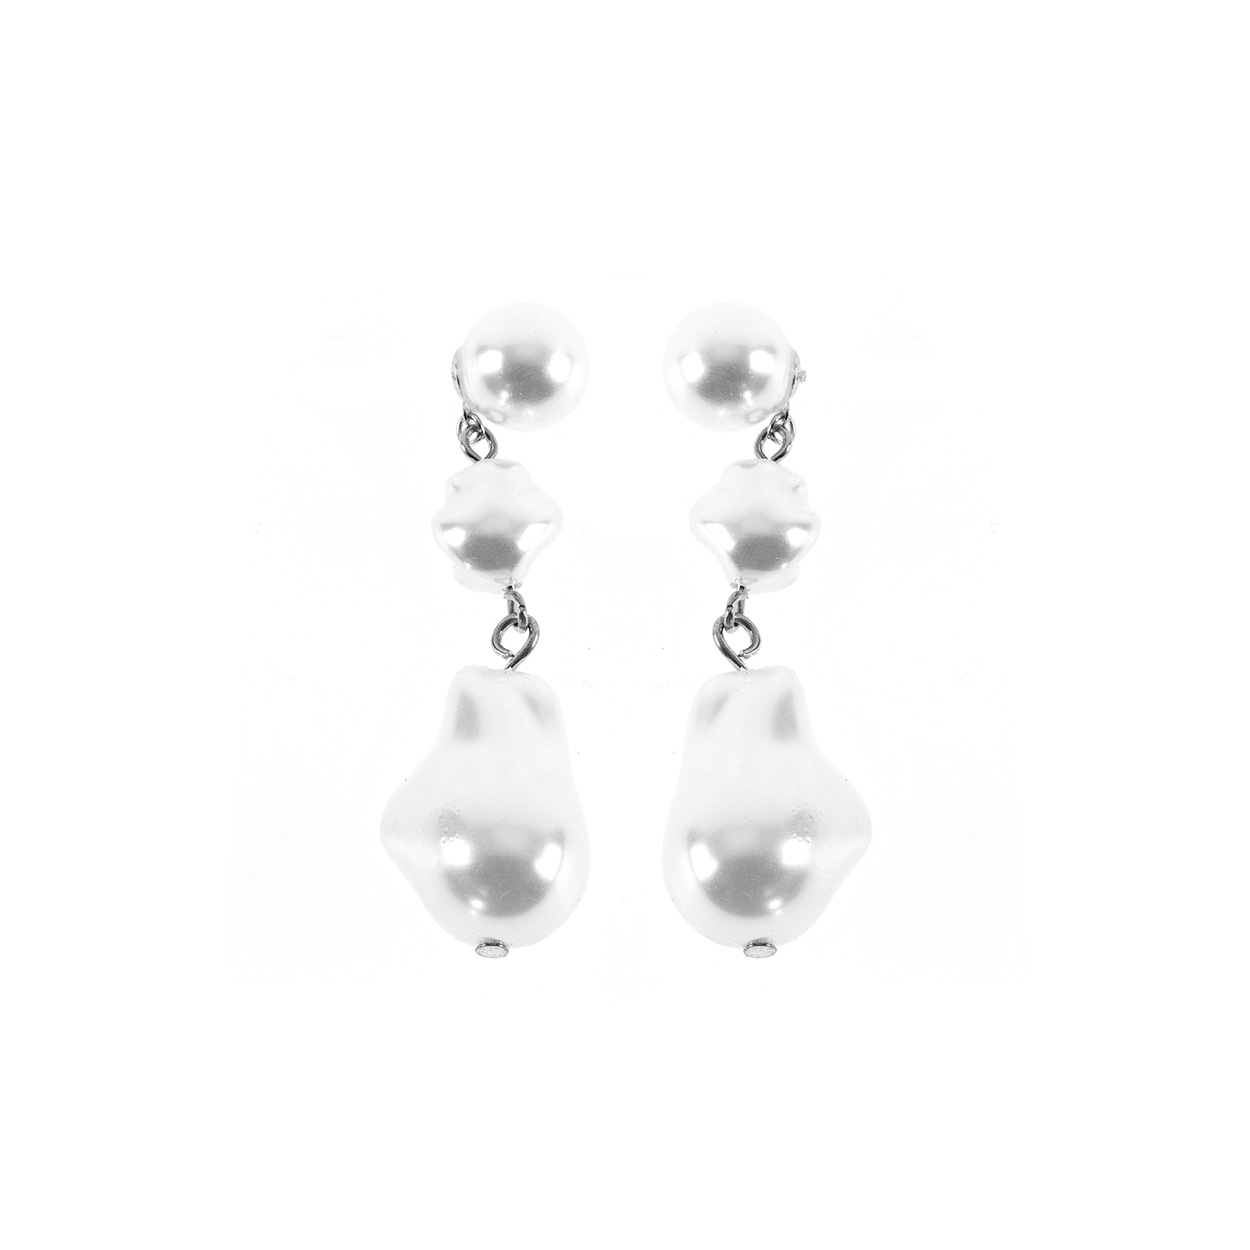 1 ROUND 2 BAROQUE PEARL EARRING